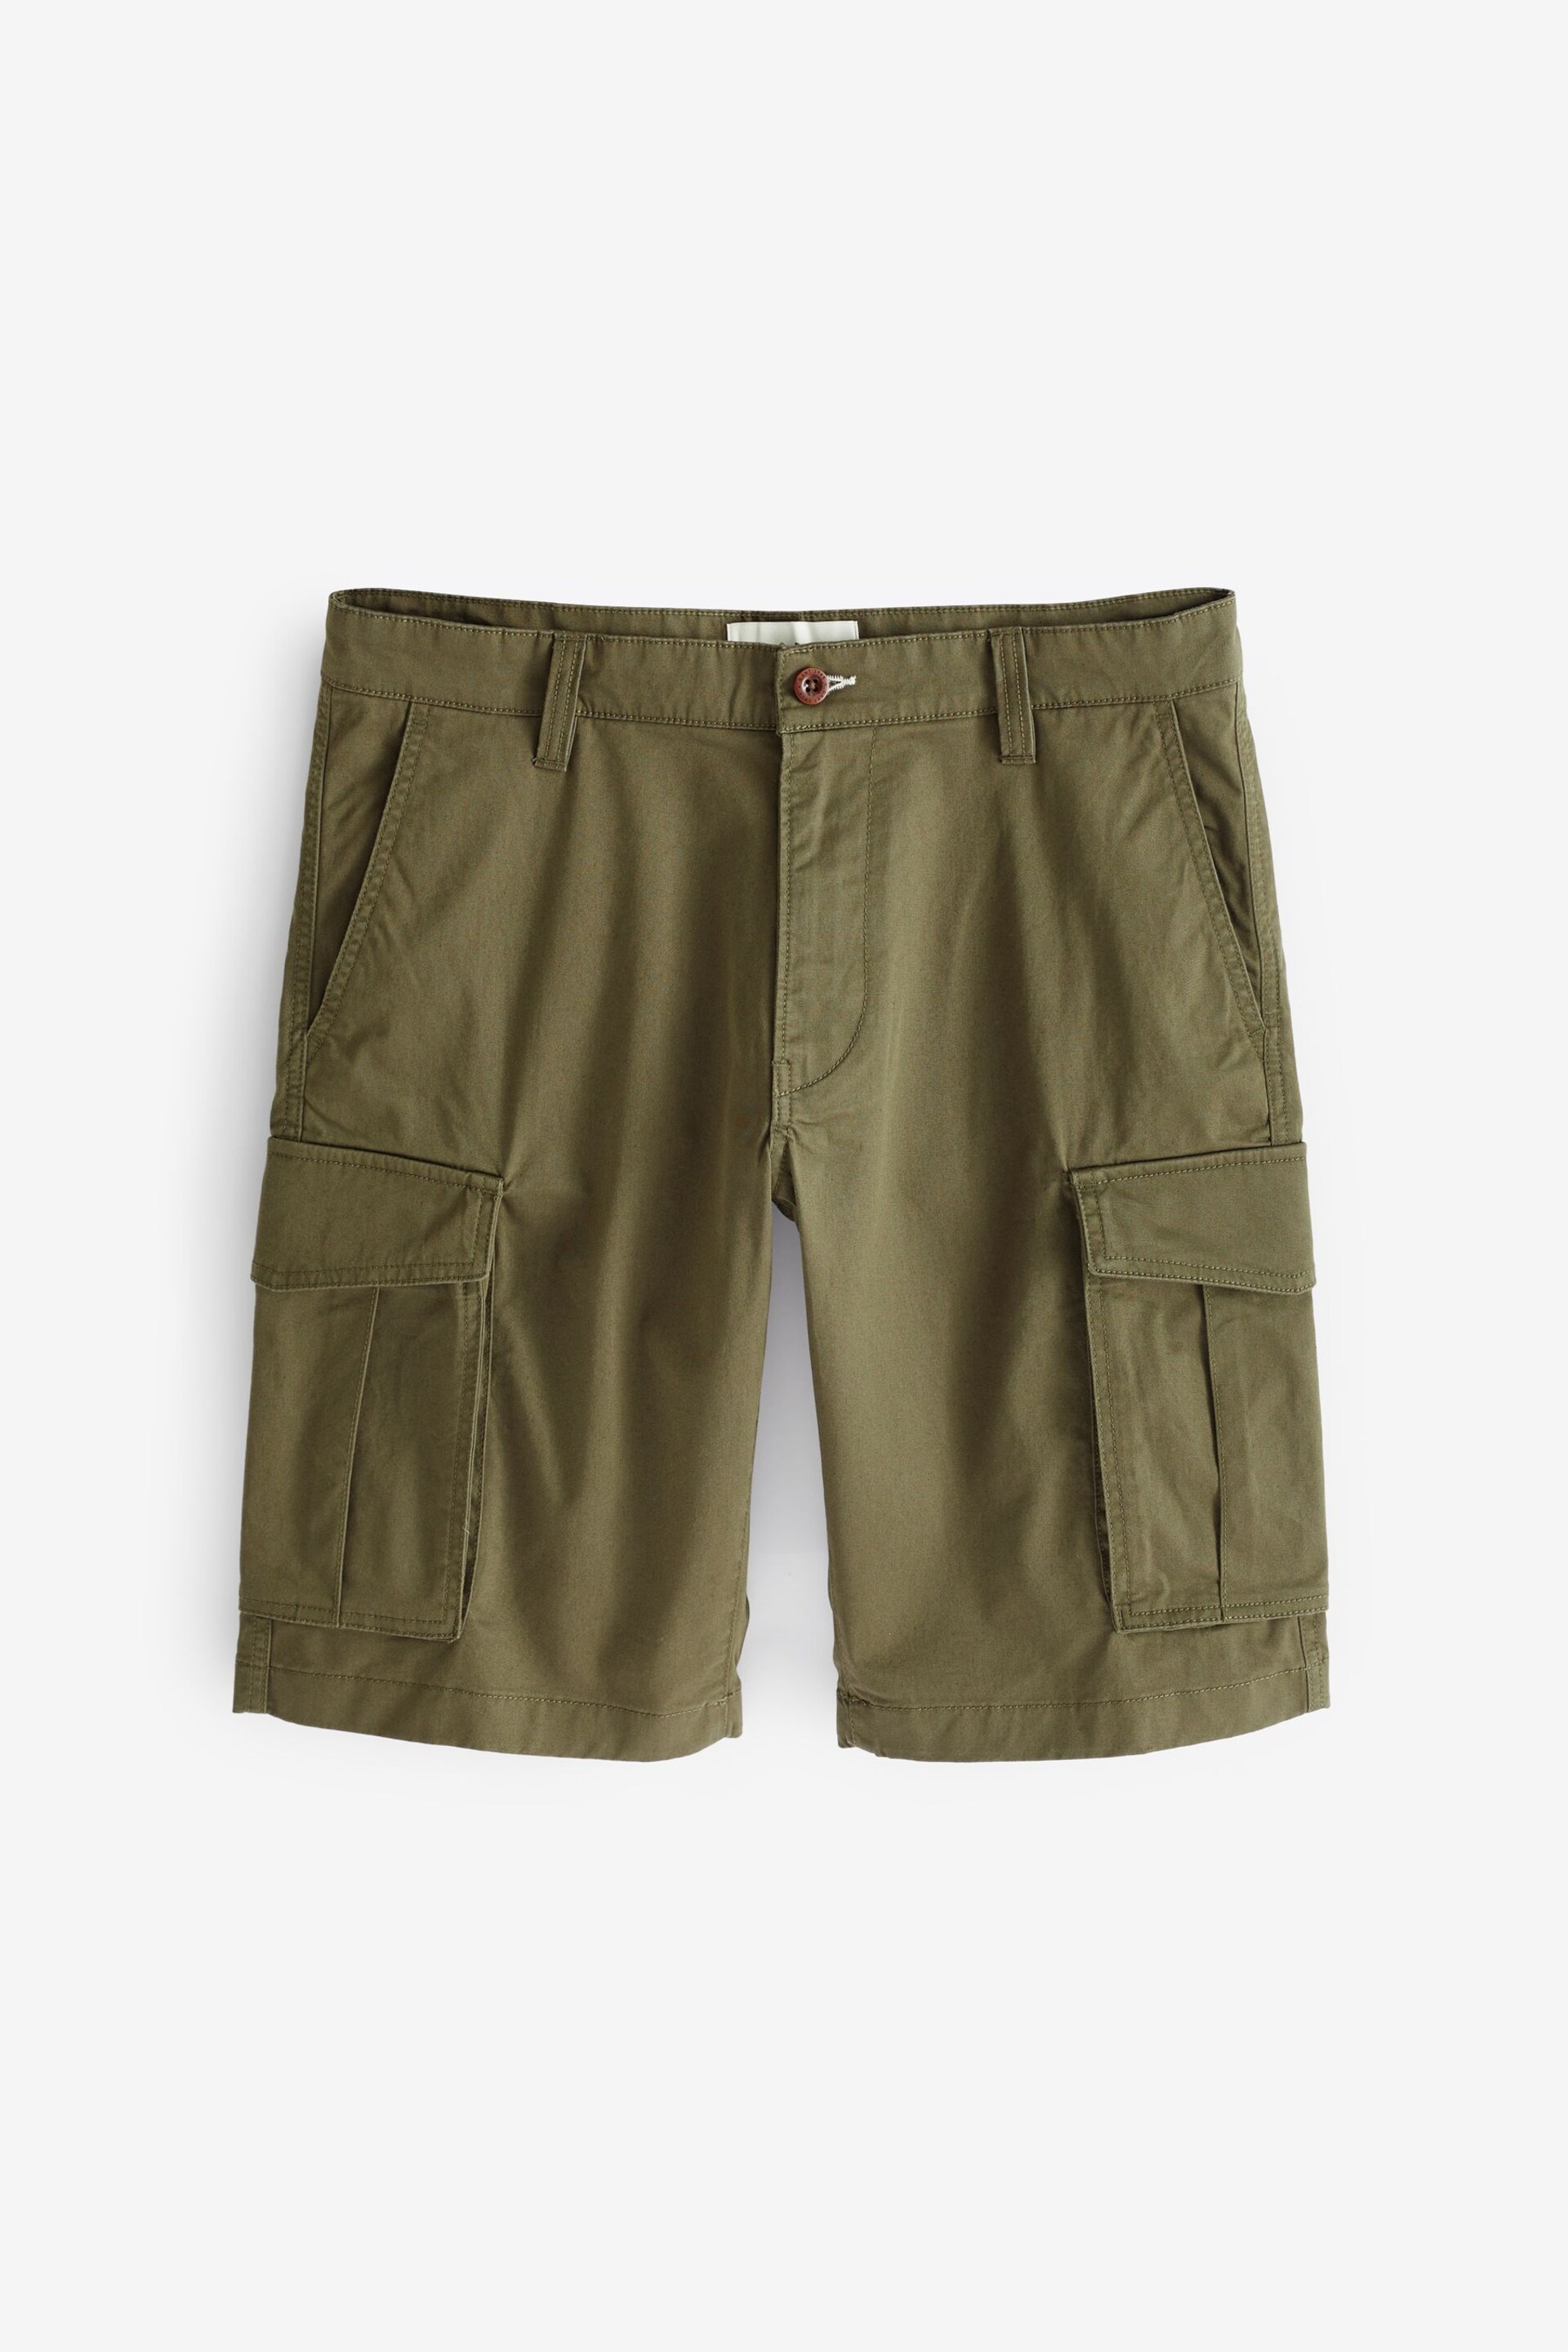 GANT Green Relaxed Twill Cargo Shorts - Image 8 of 9